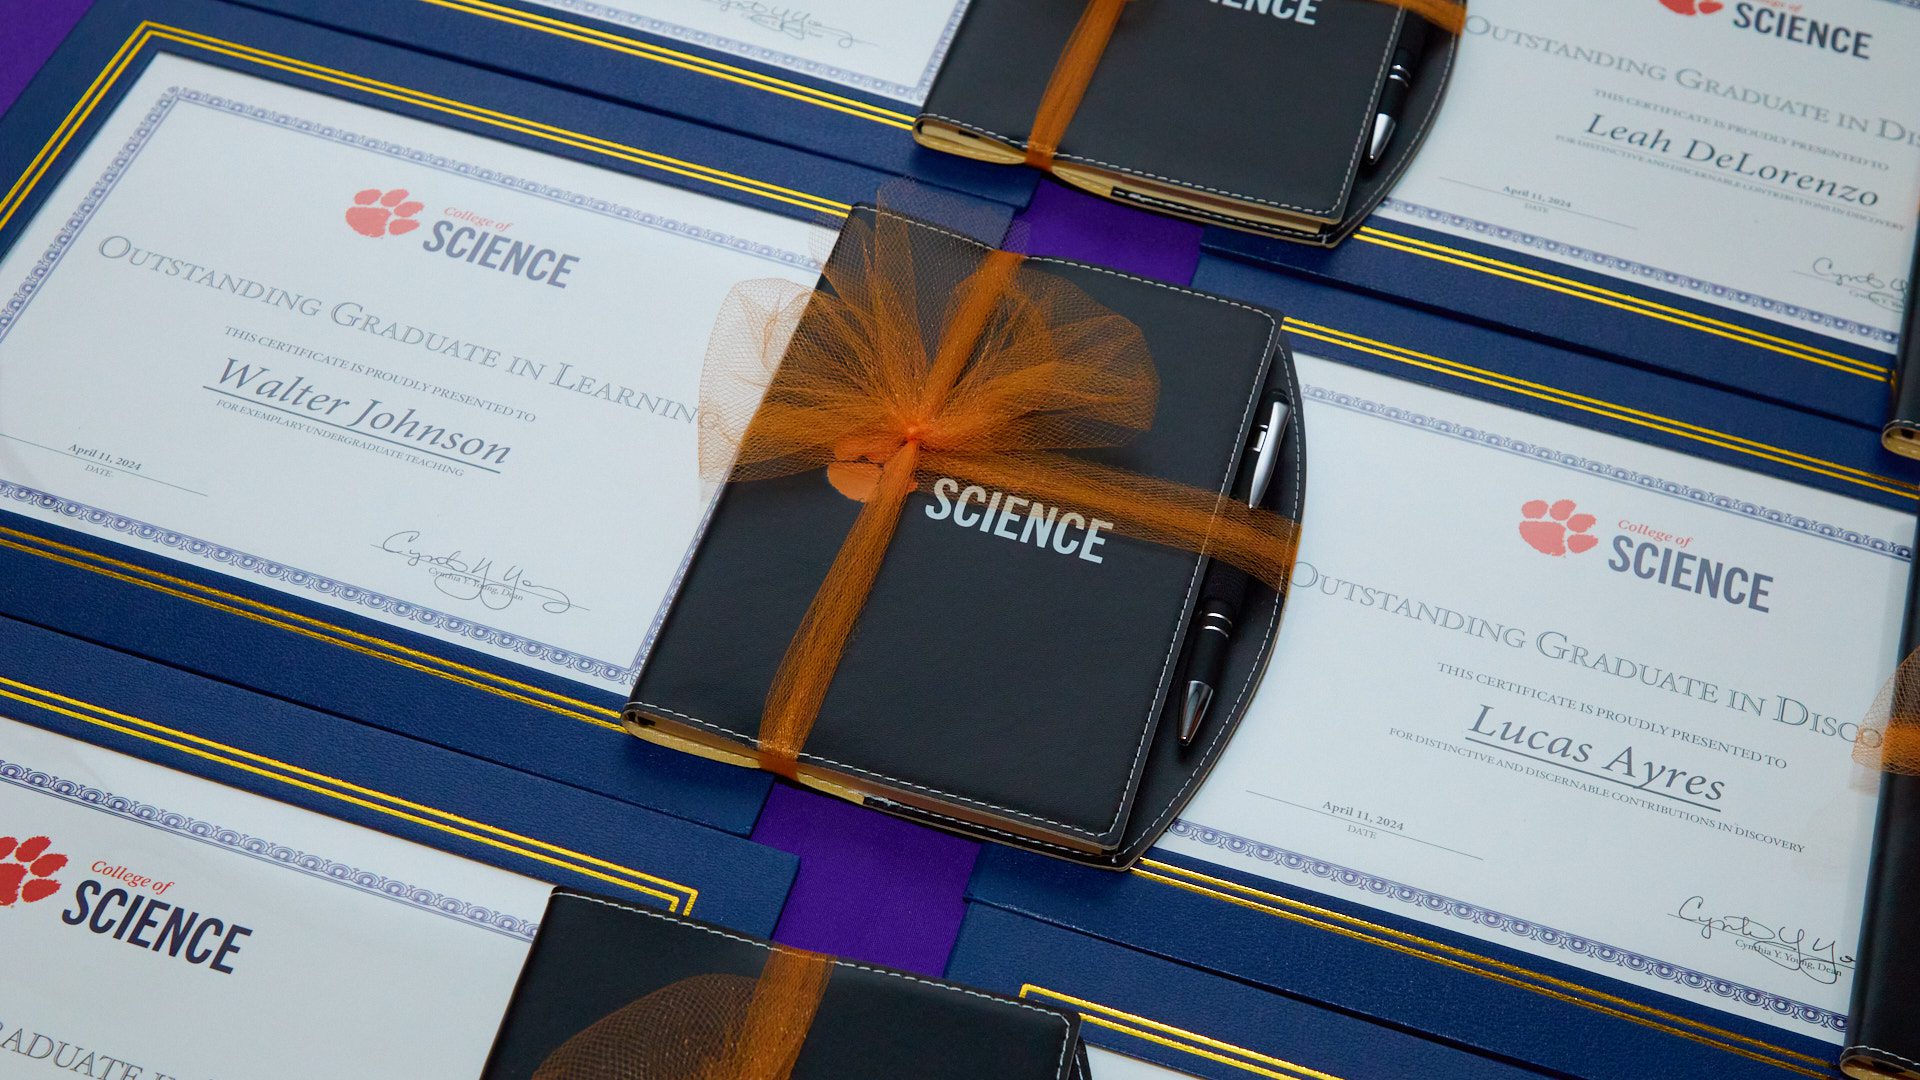 A photo of College of Science award certificates